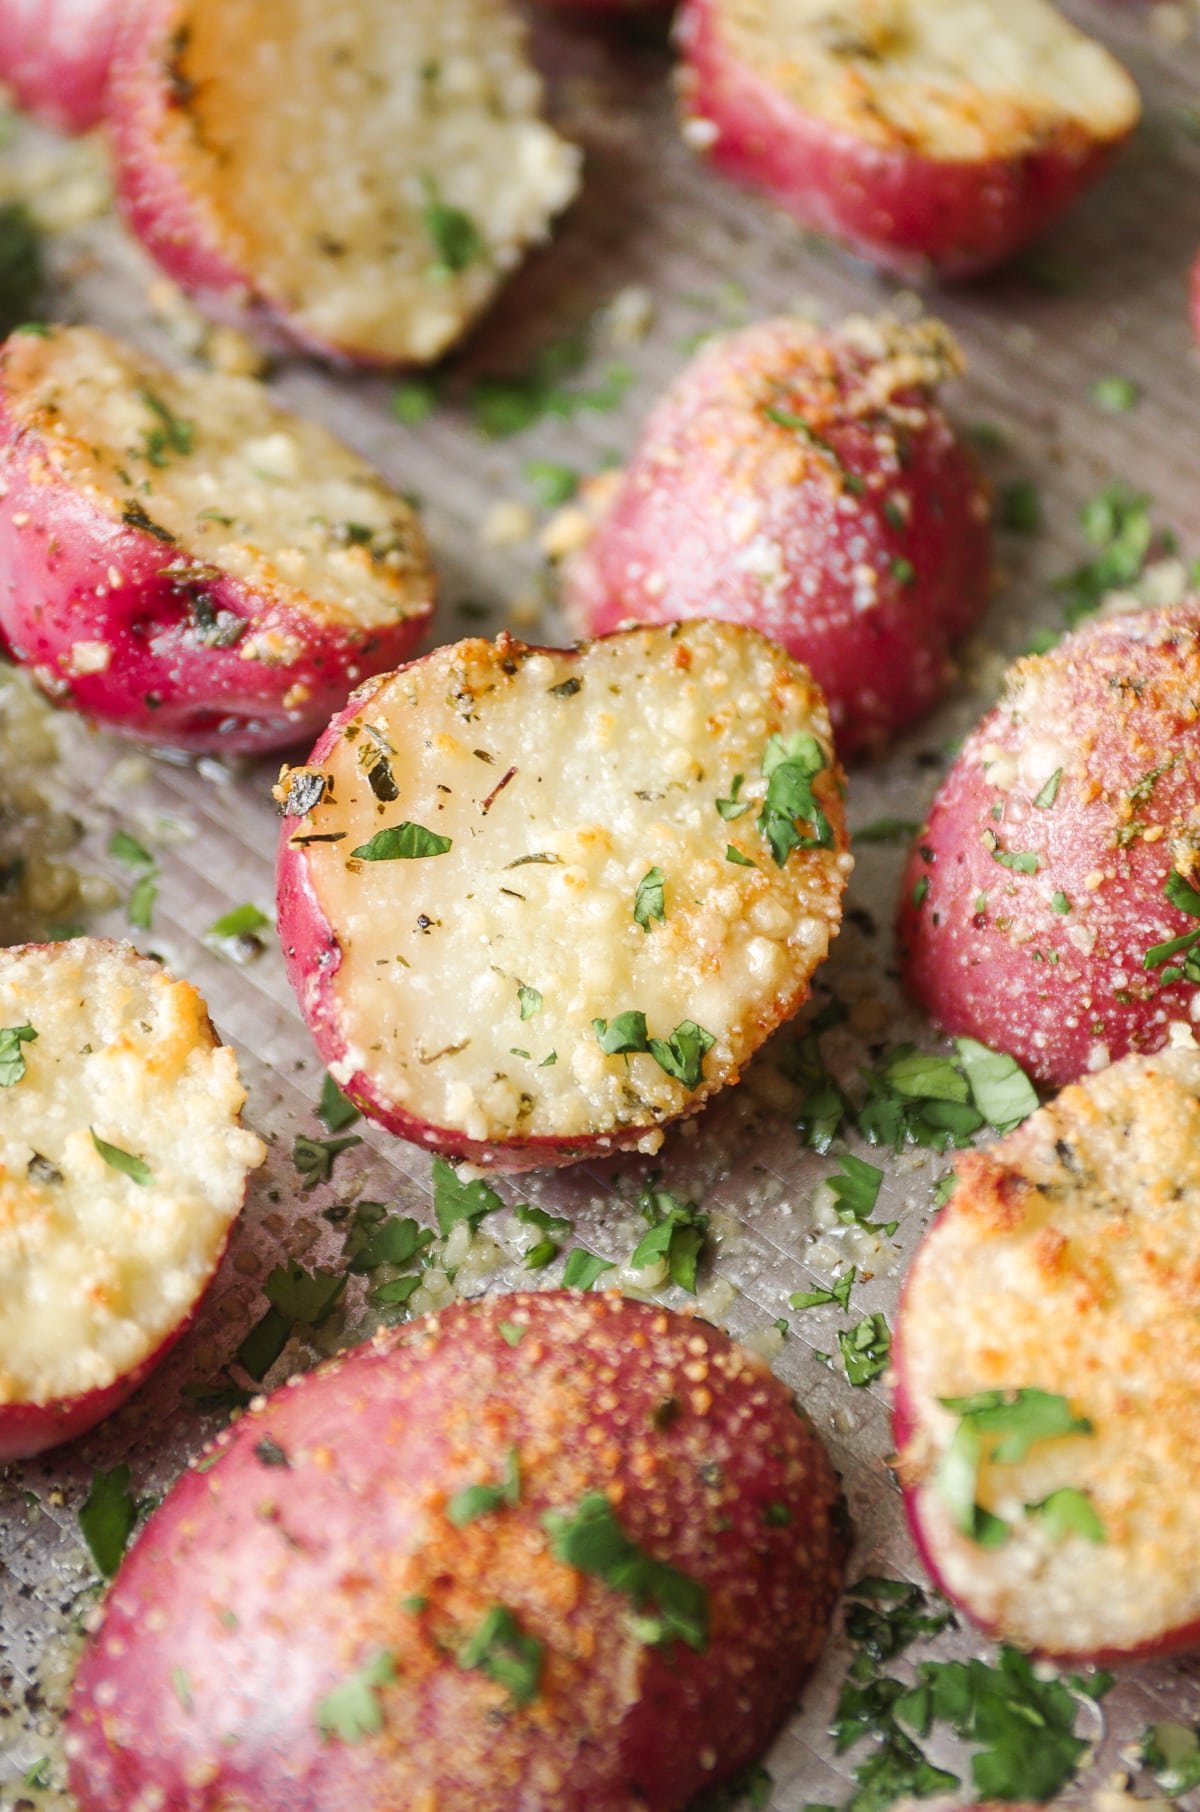 Close up image of halved roasted mini red potatoes that have been roasted with garlic, parmesan cheese, and herbs.